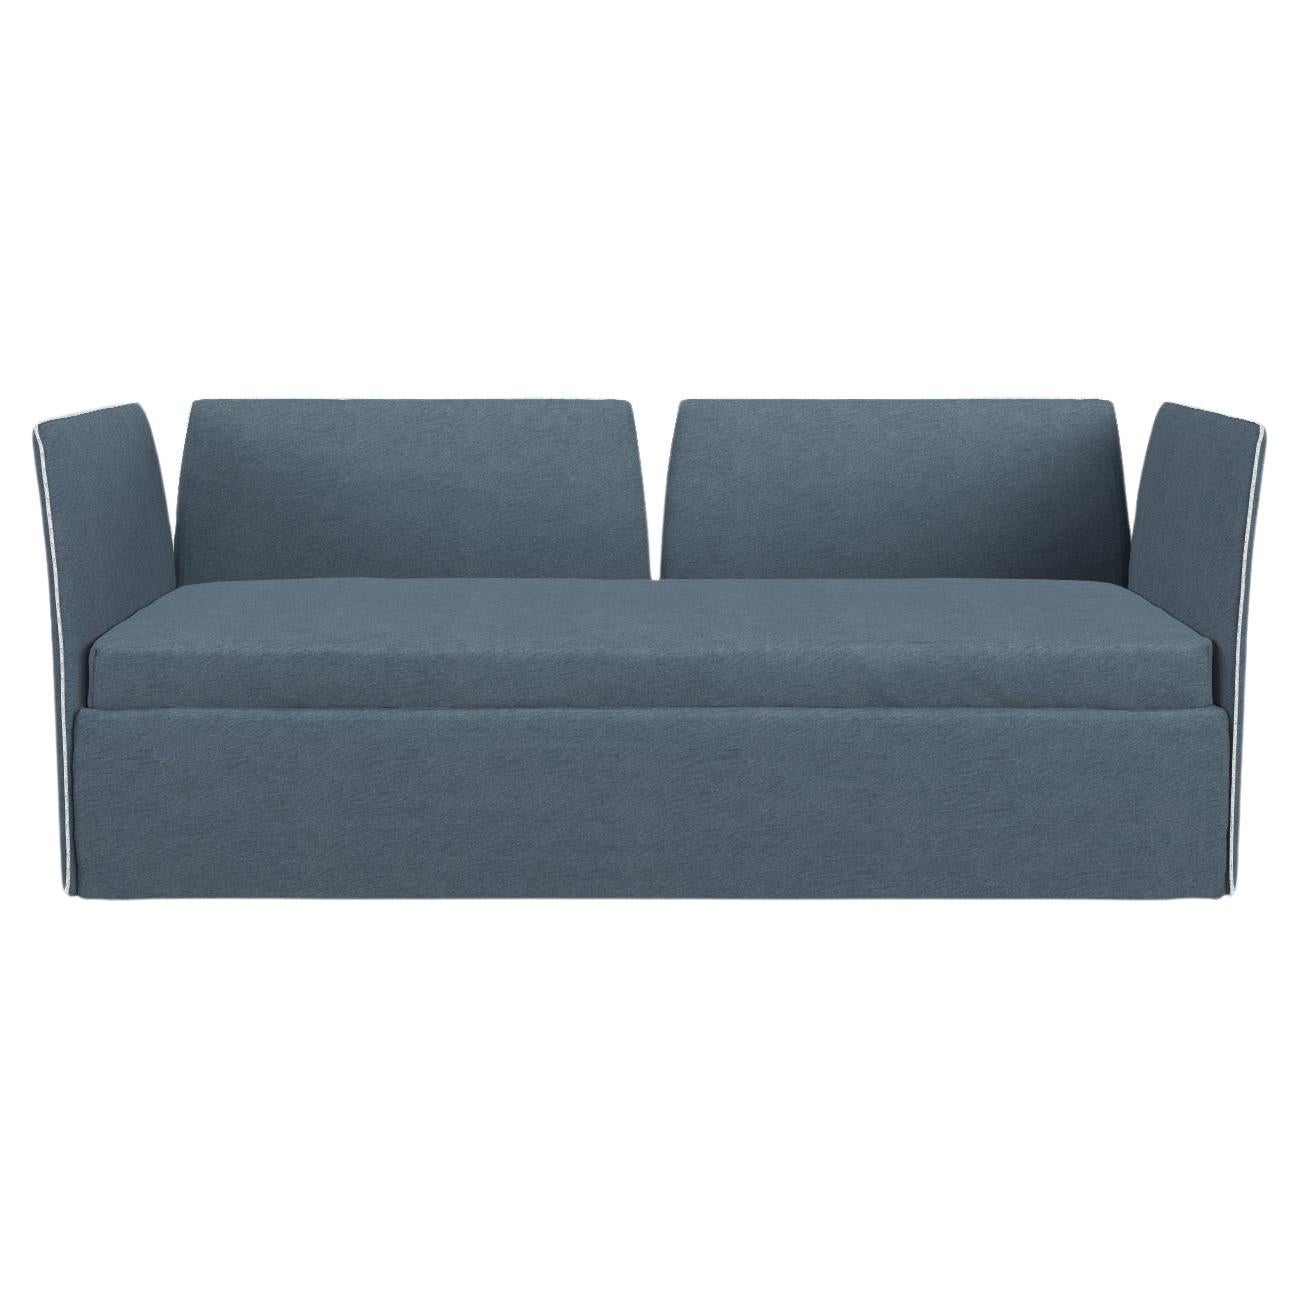 Gervasoni Open 6 Large Modular Bed Sofa in Munch Upholstery by Paola Navone For Sale